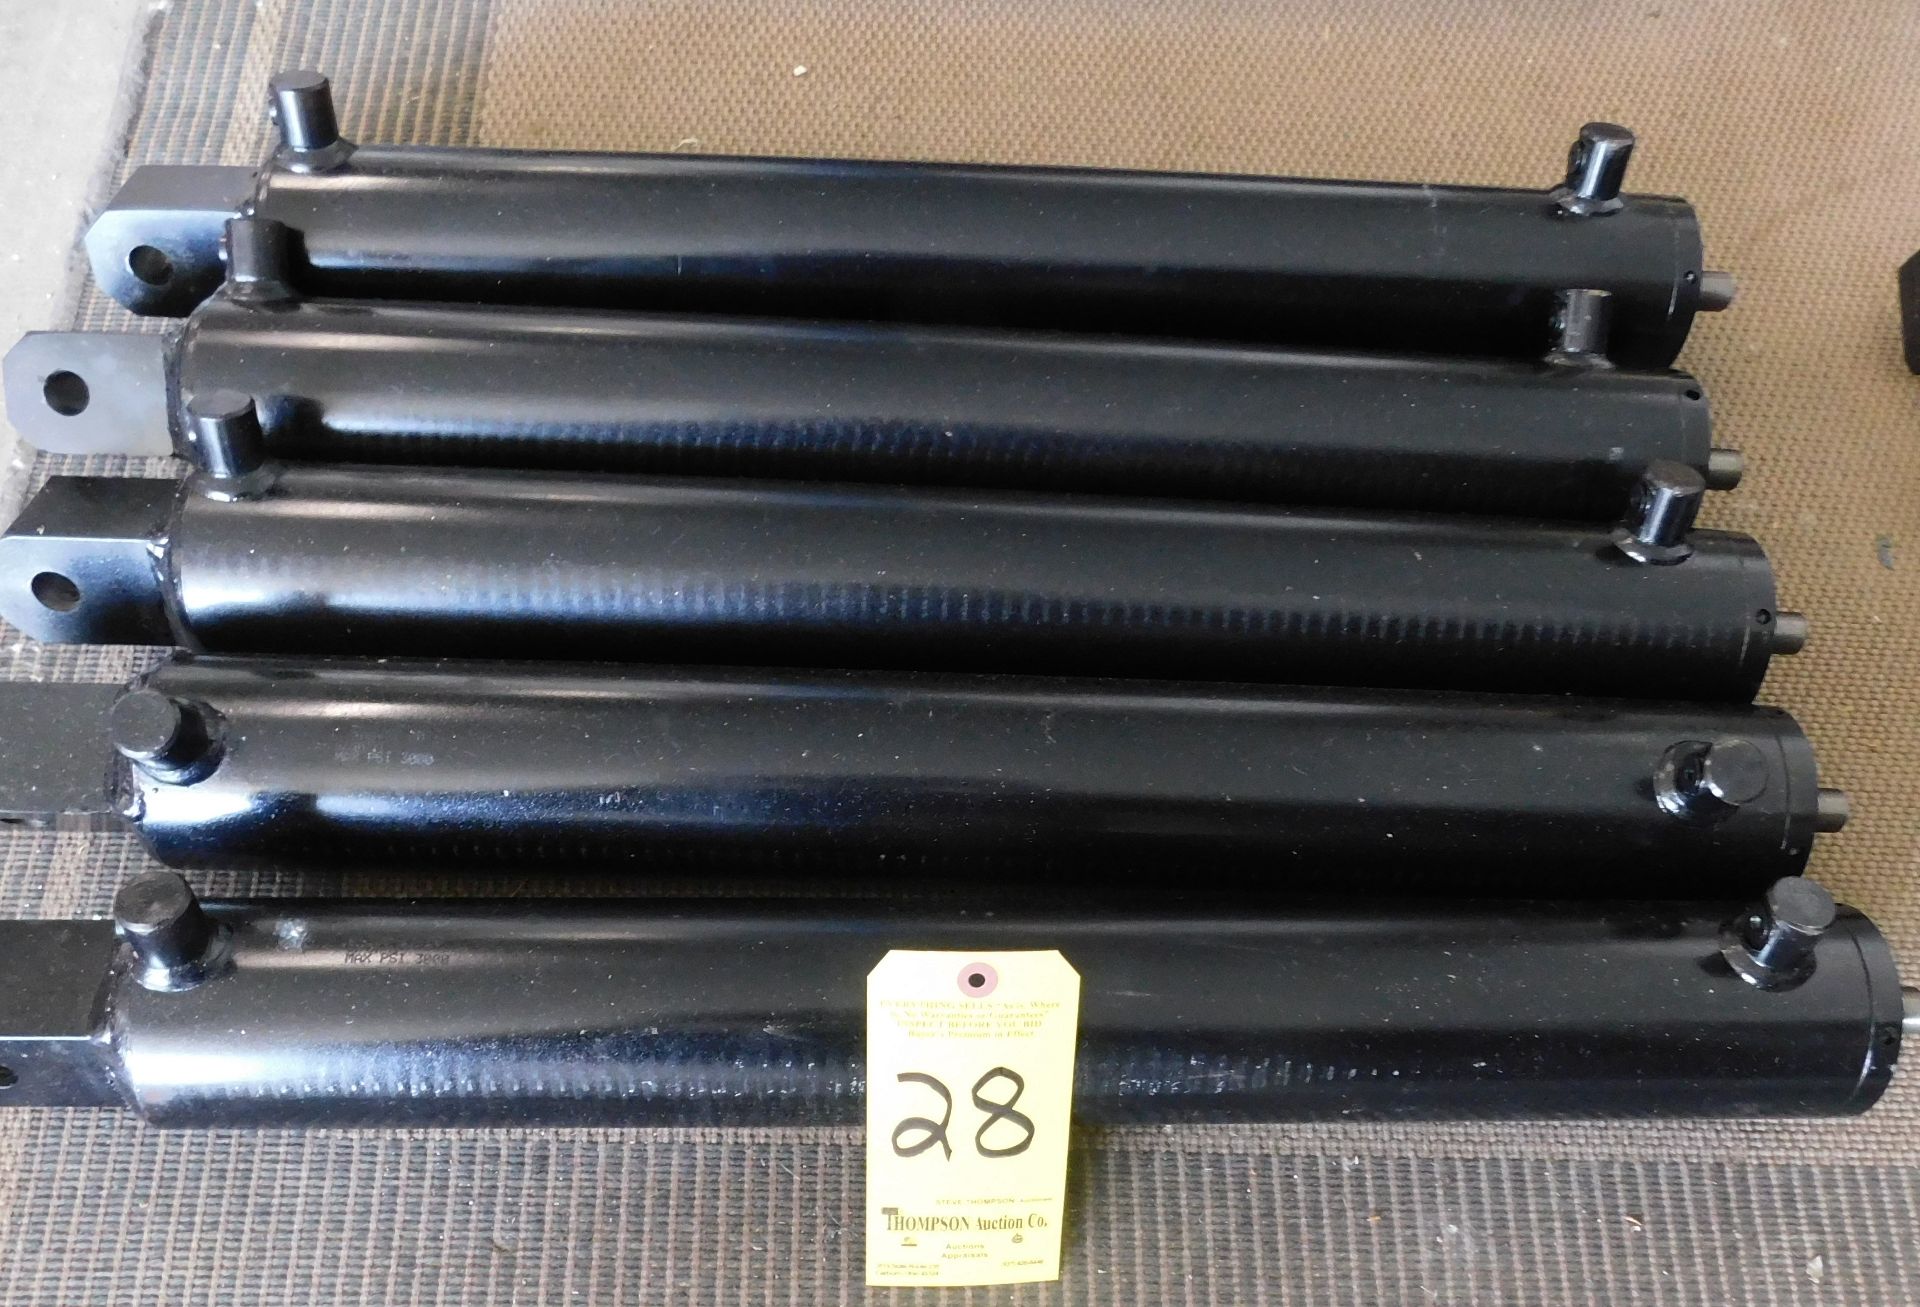 (5) Best Metal Products Double Acting Hydraulic Cylinders, Part #A-300-21-00, 3,000 Max. PSI, 21"